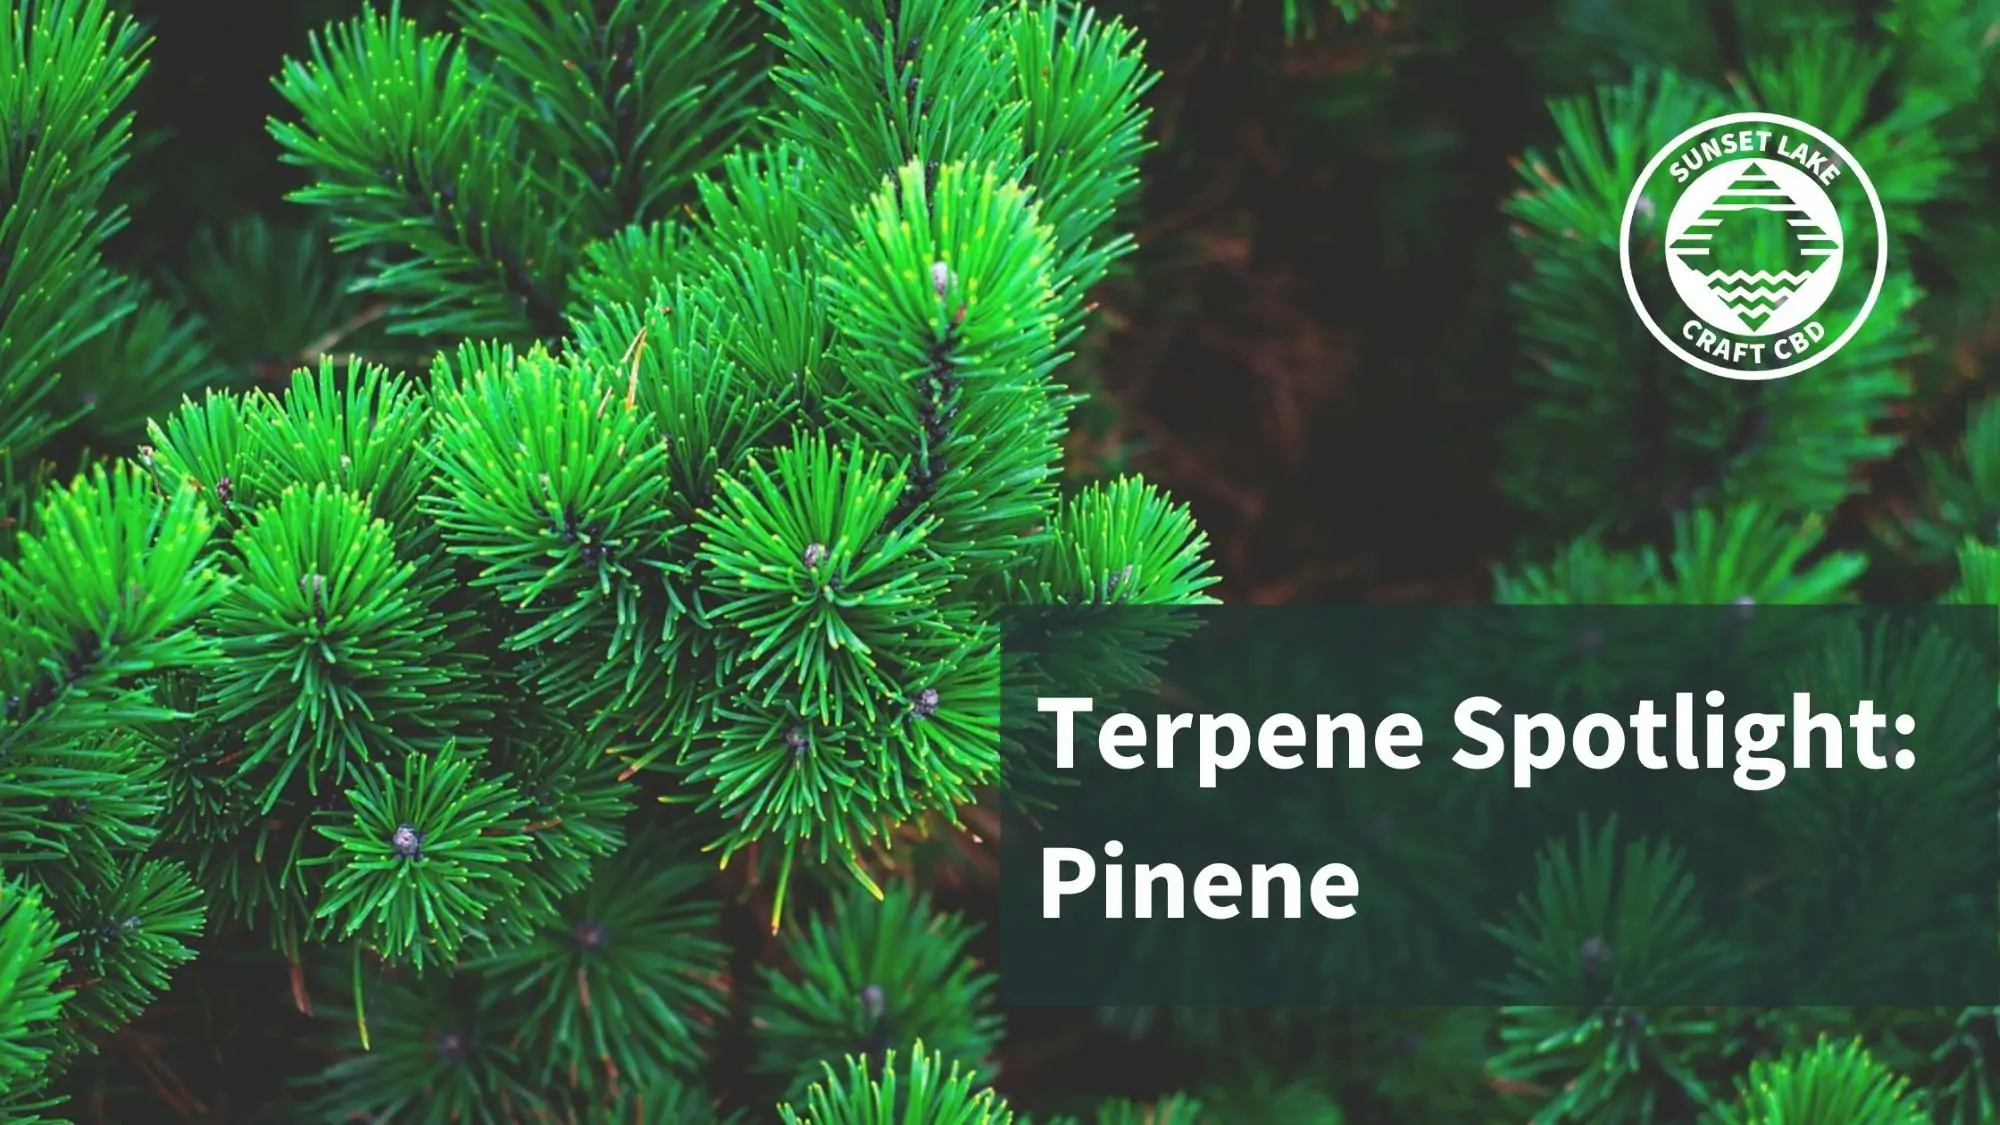 Close up of pine needles with the text "Terpene Spotlight: Pinene"